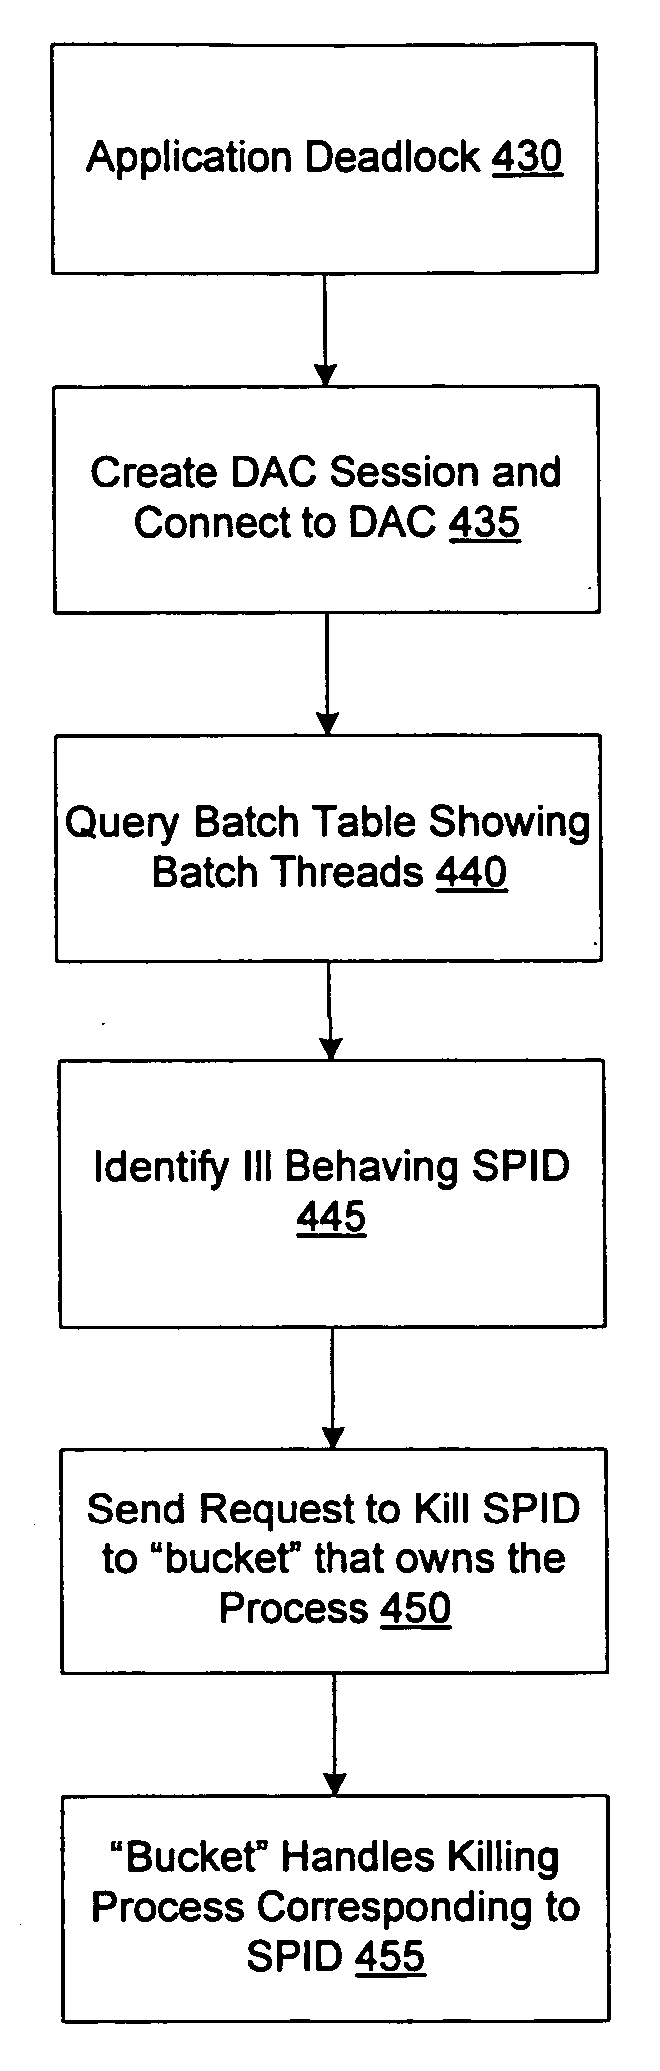 Dedicated connection to a database server for alternative failure recovery